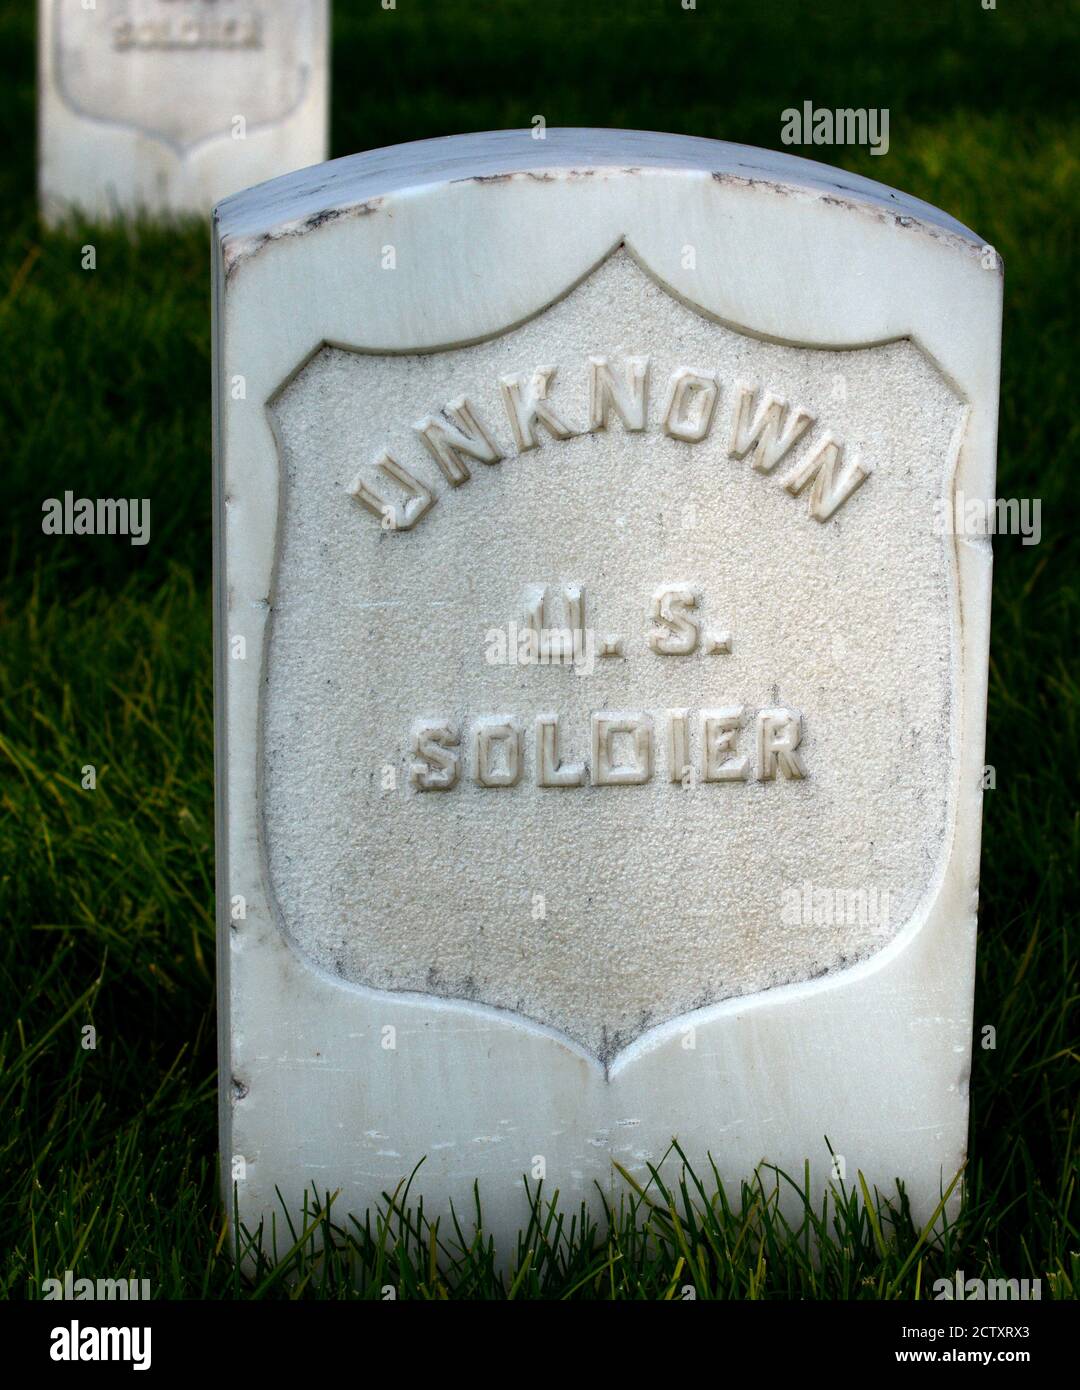 Marble tombstones mark the19th century graves of unknown U.S. soldiers who died in America's Civil War in the 1860s. Stock Photo